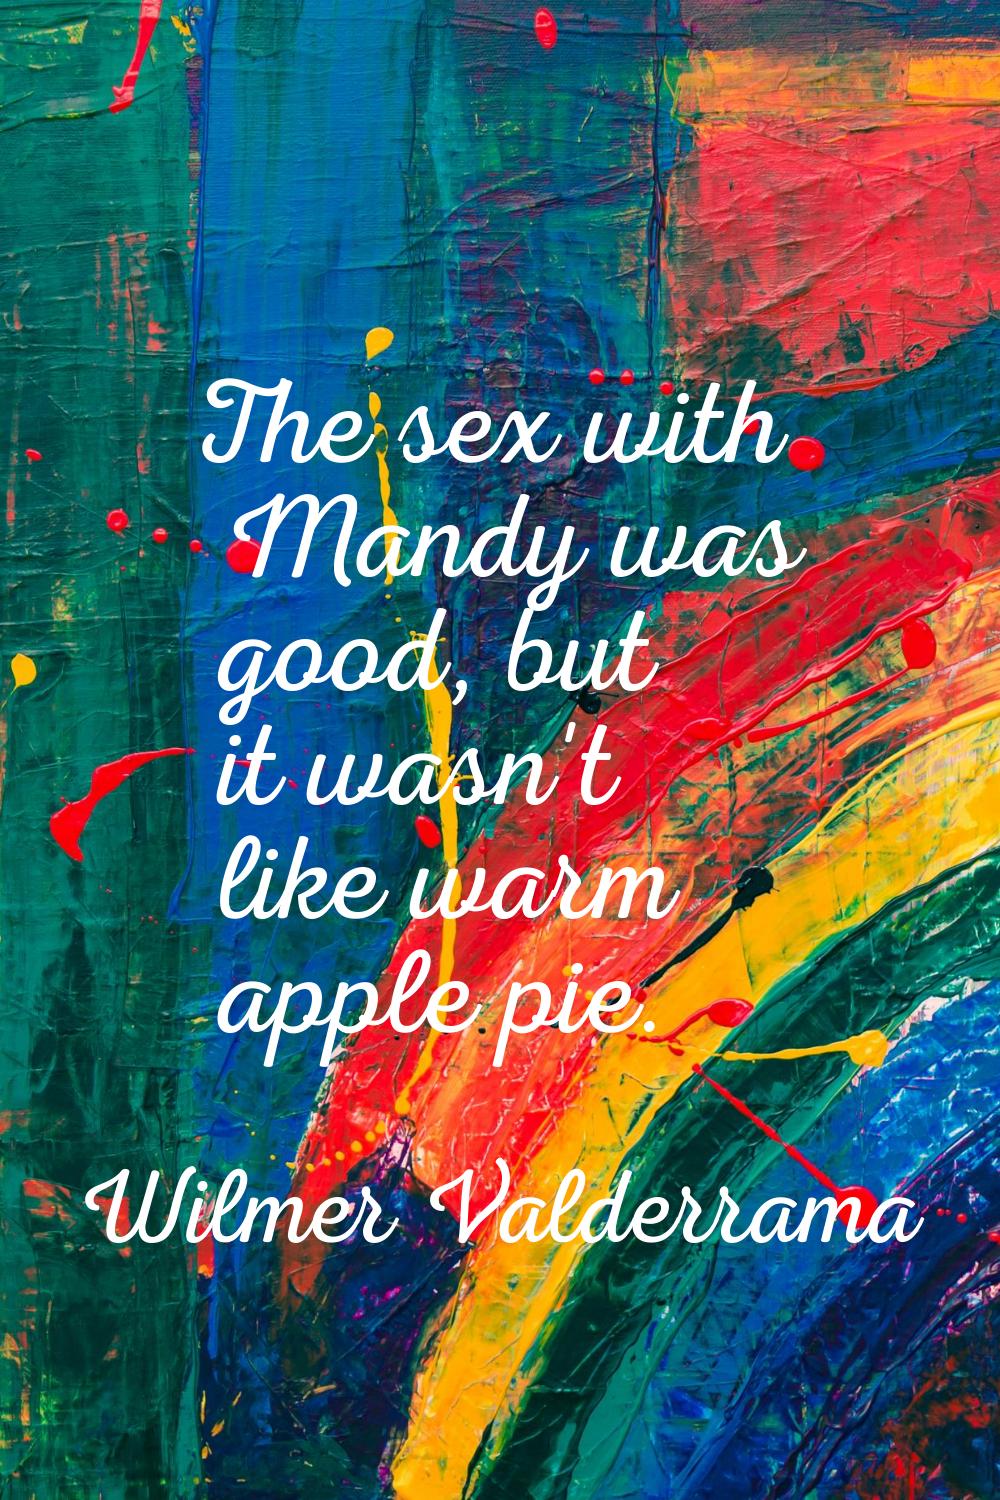 The sex with Mandy was good, but it wasn't like warm apple pie.